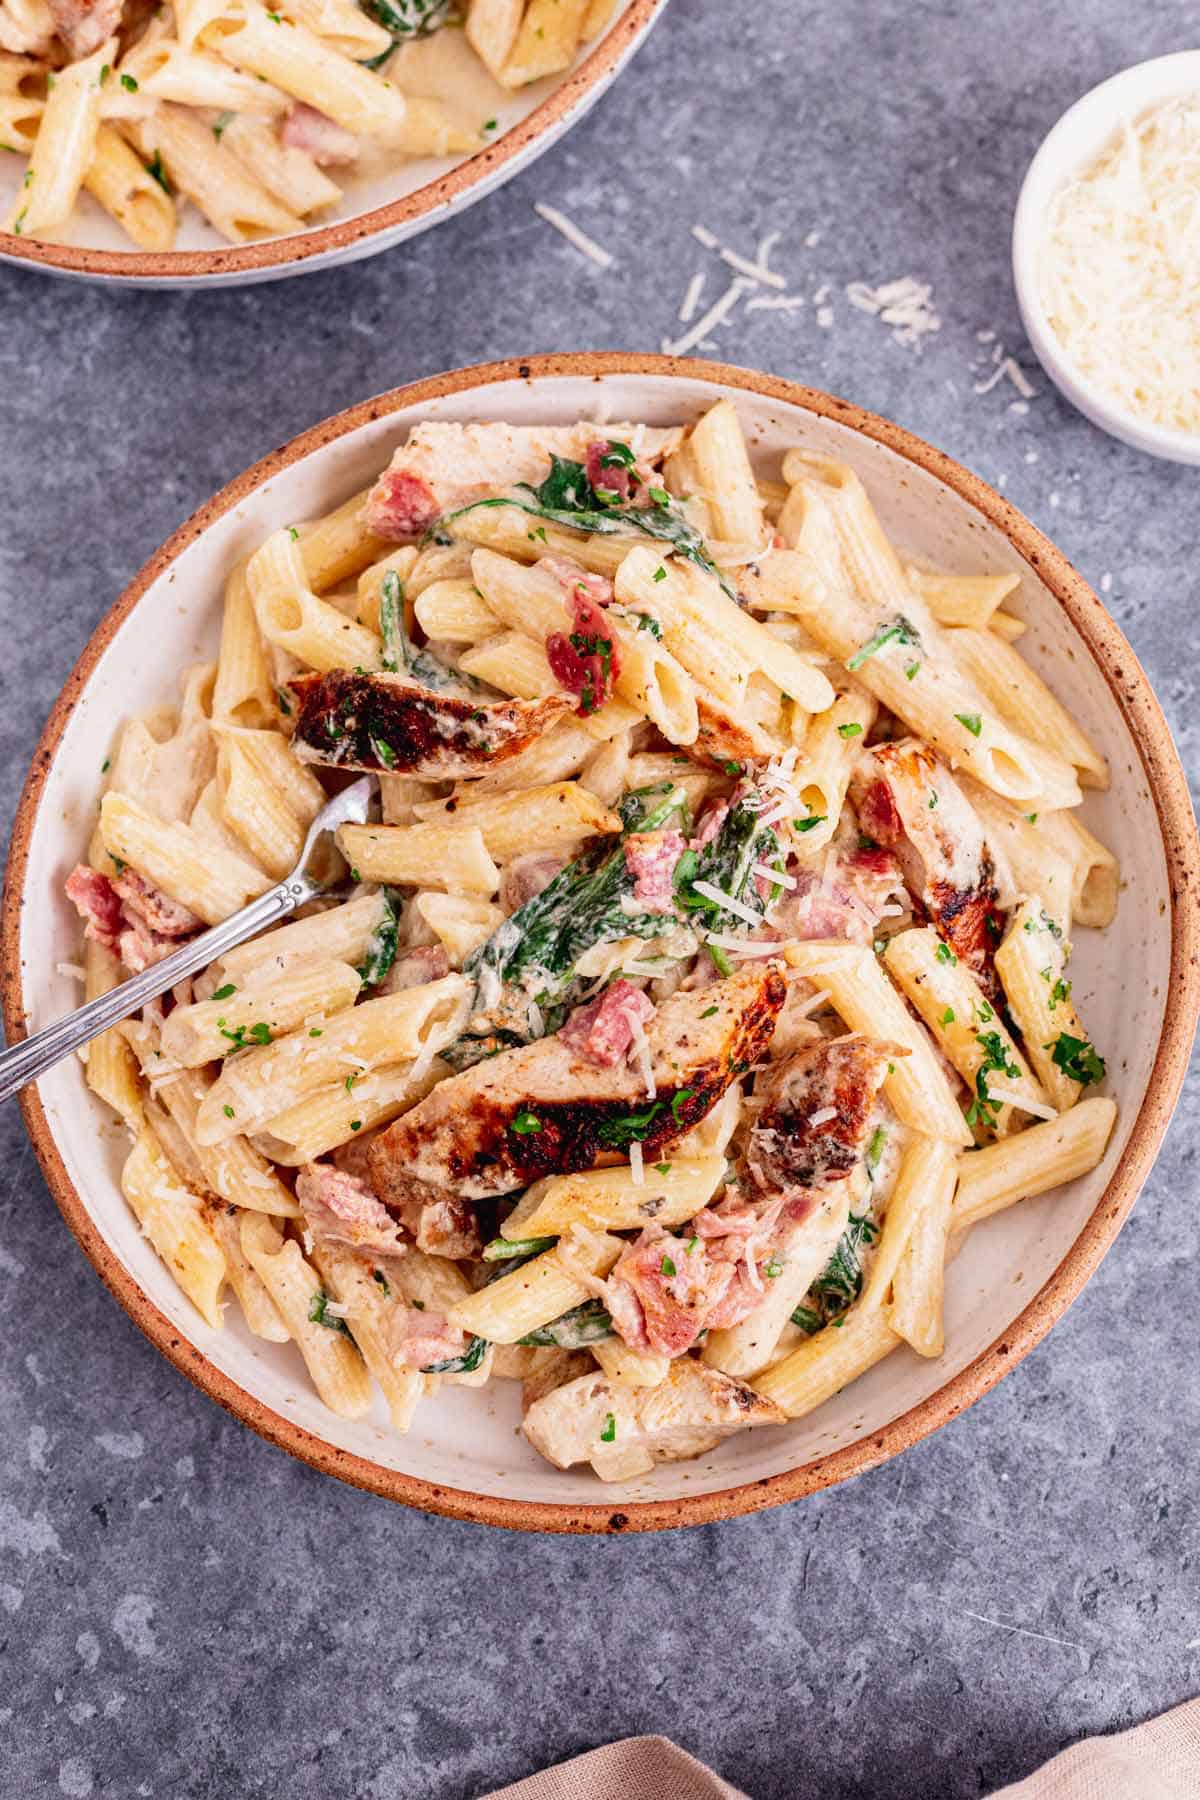 This Creamy Chicken Bacon And Spinach Pasta is one of our all-time favorite dinner recipes. Tender juicy chicken over pasta in a rich creamy sauce with spinach and bacon. An excellent easy weeknight or weekend dinner recipe for the whole family. Yum! - The Yummy Bowl